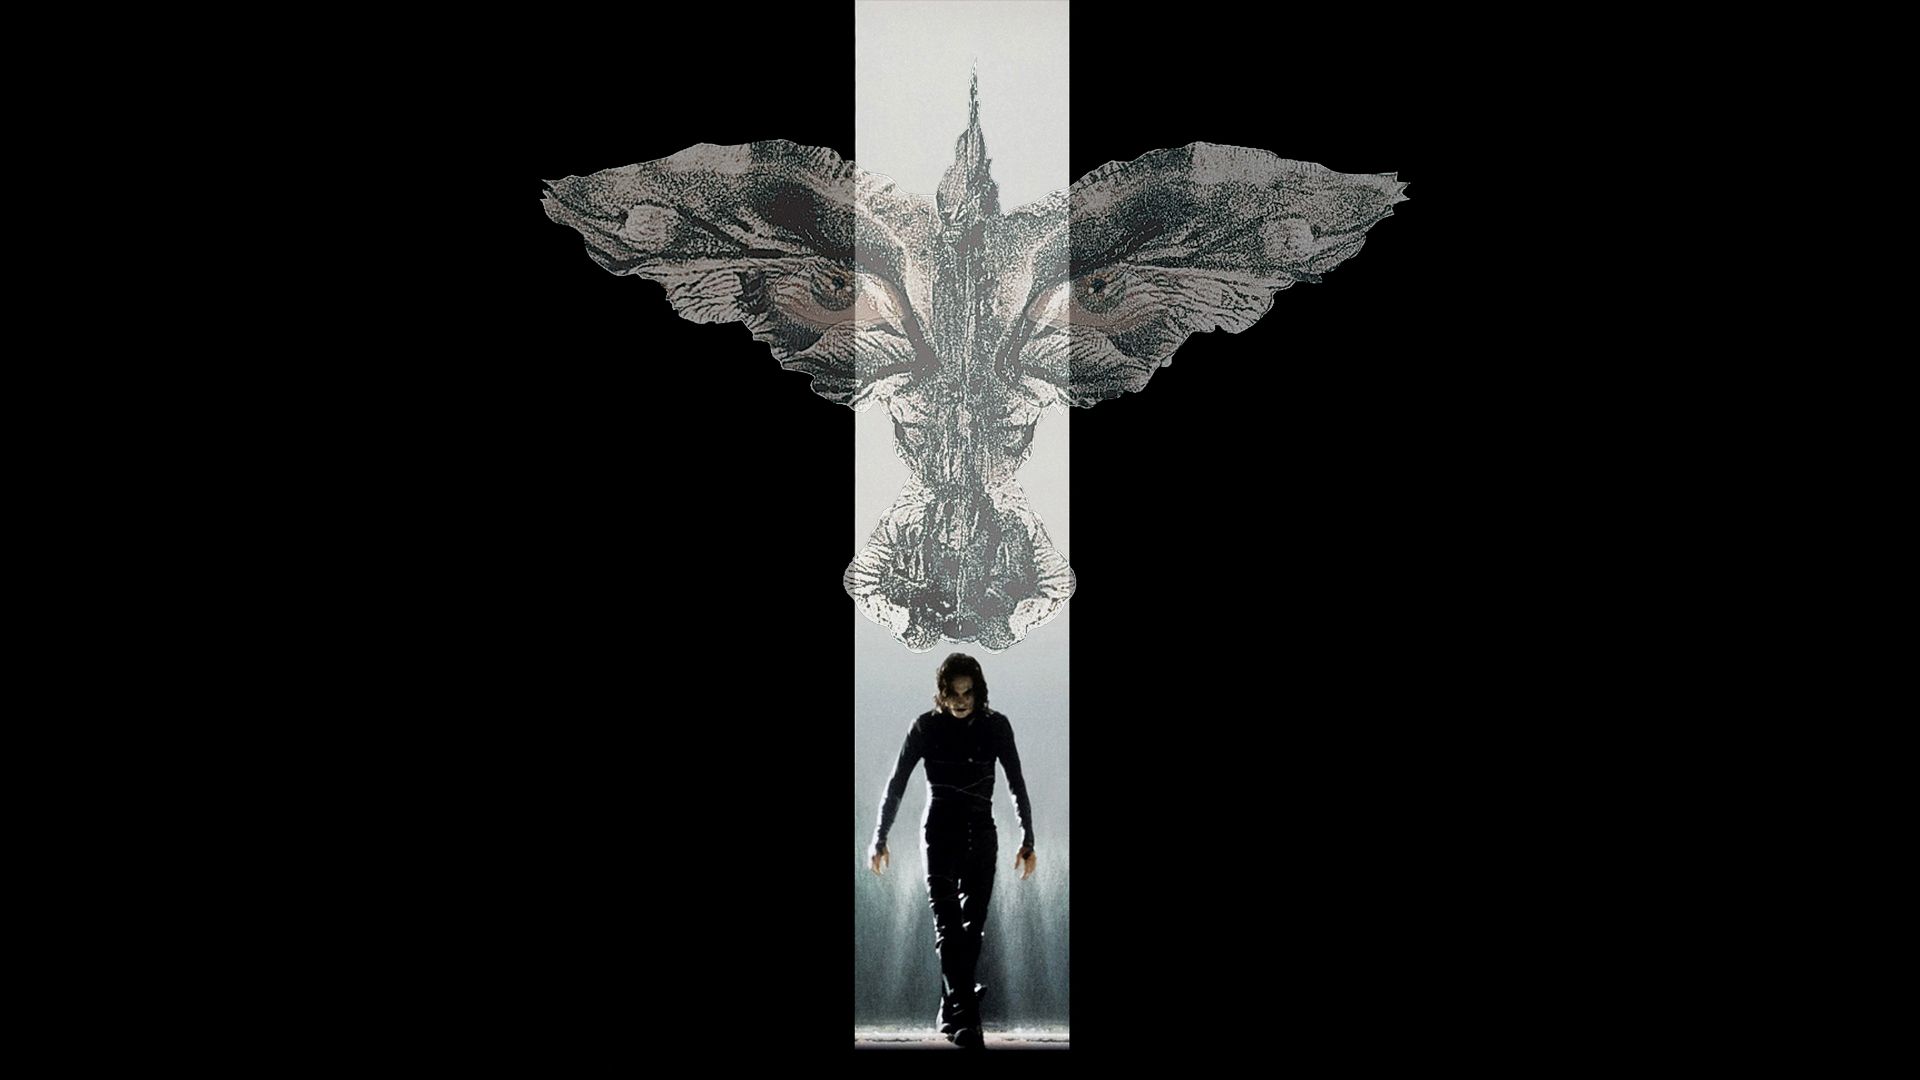 The Crow background